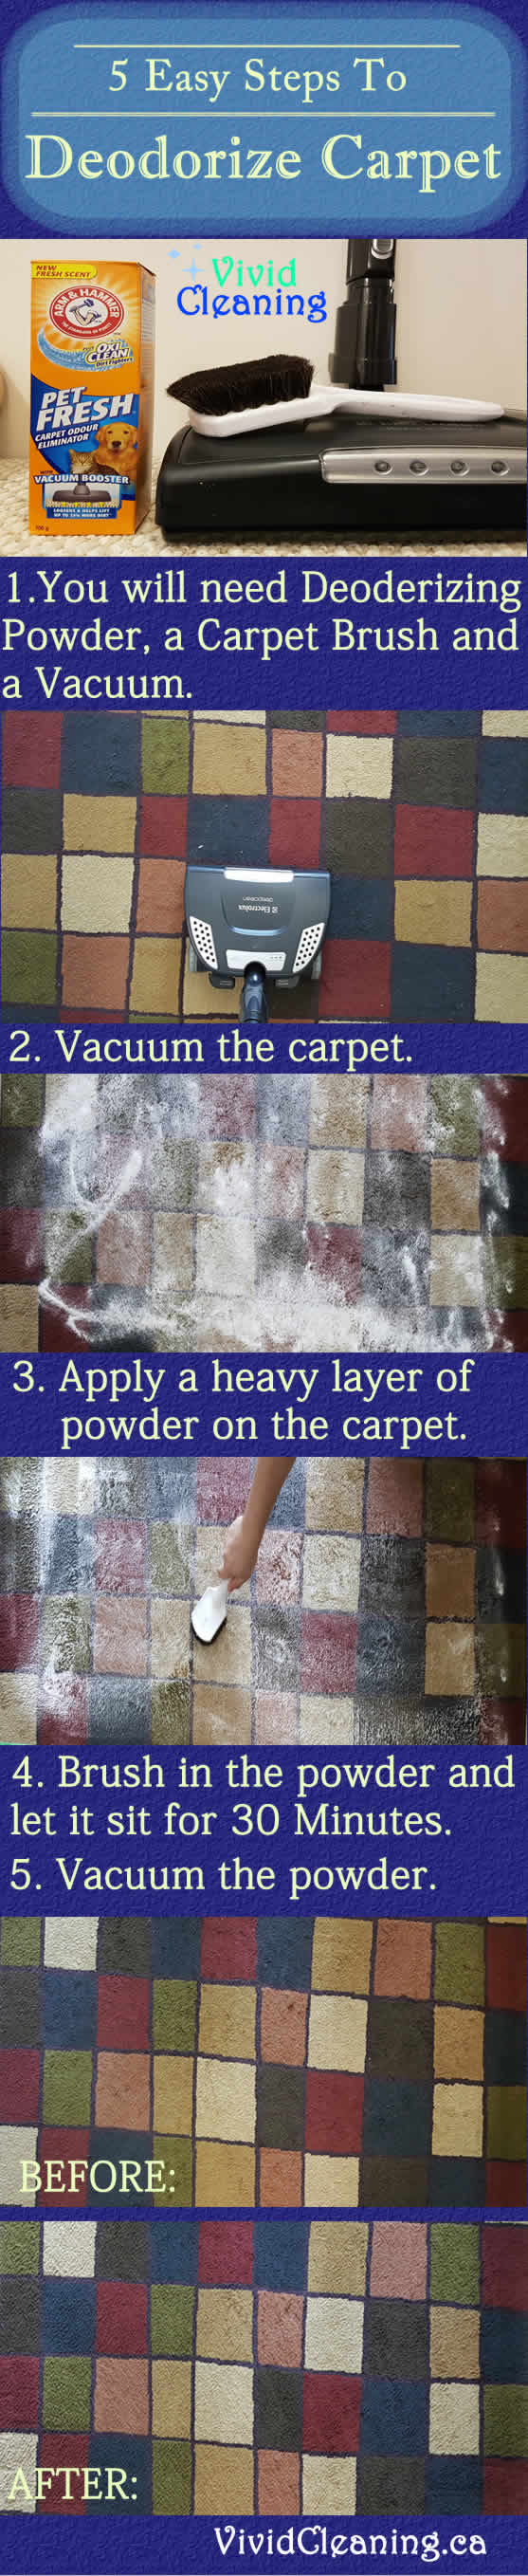 5 Easy Steps To Deodorize Carpet 1.You will need Deodorizing Powder, a Carpet Brush and a Vacuum. 2. Vacuum the carpet. 3. Apply a heavy layer of powder on the carpet. 4. Brush in the powder andlet it sit for 30 Minutes. 5. Vacuum the powder.